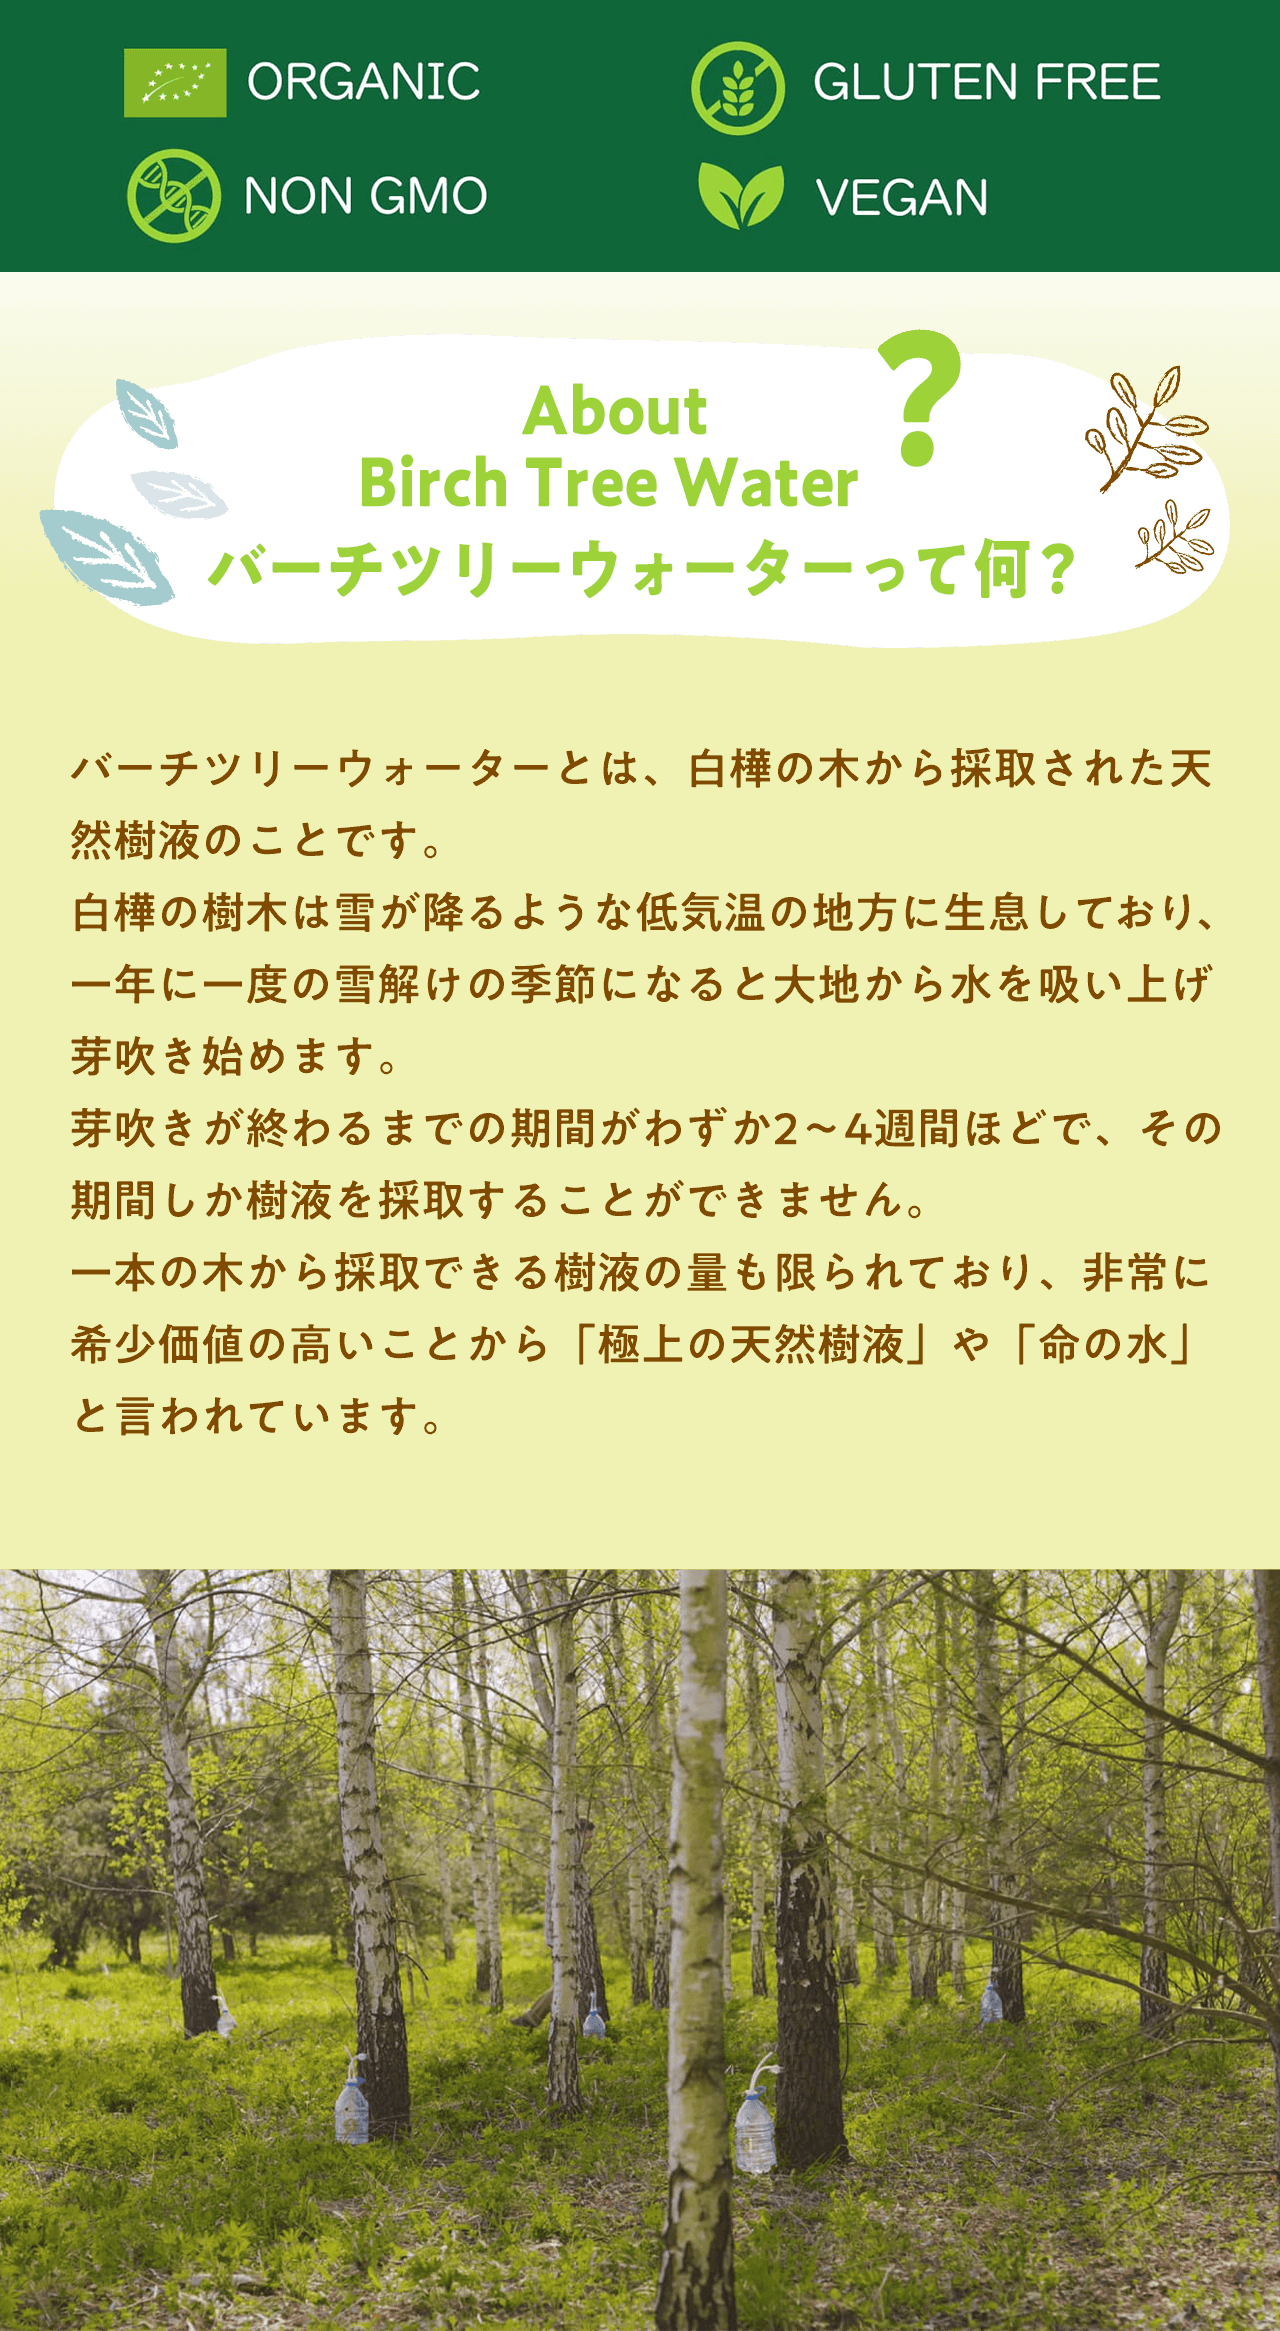 About Birch Tree Water?バーチツリーウォーターって何？